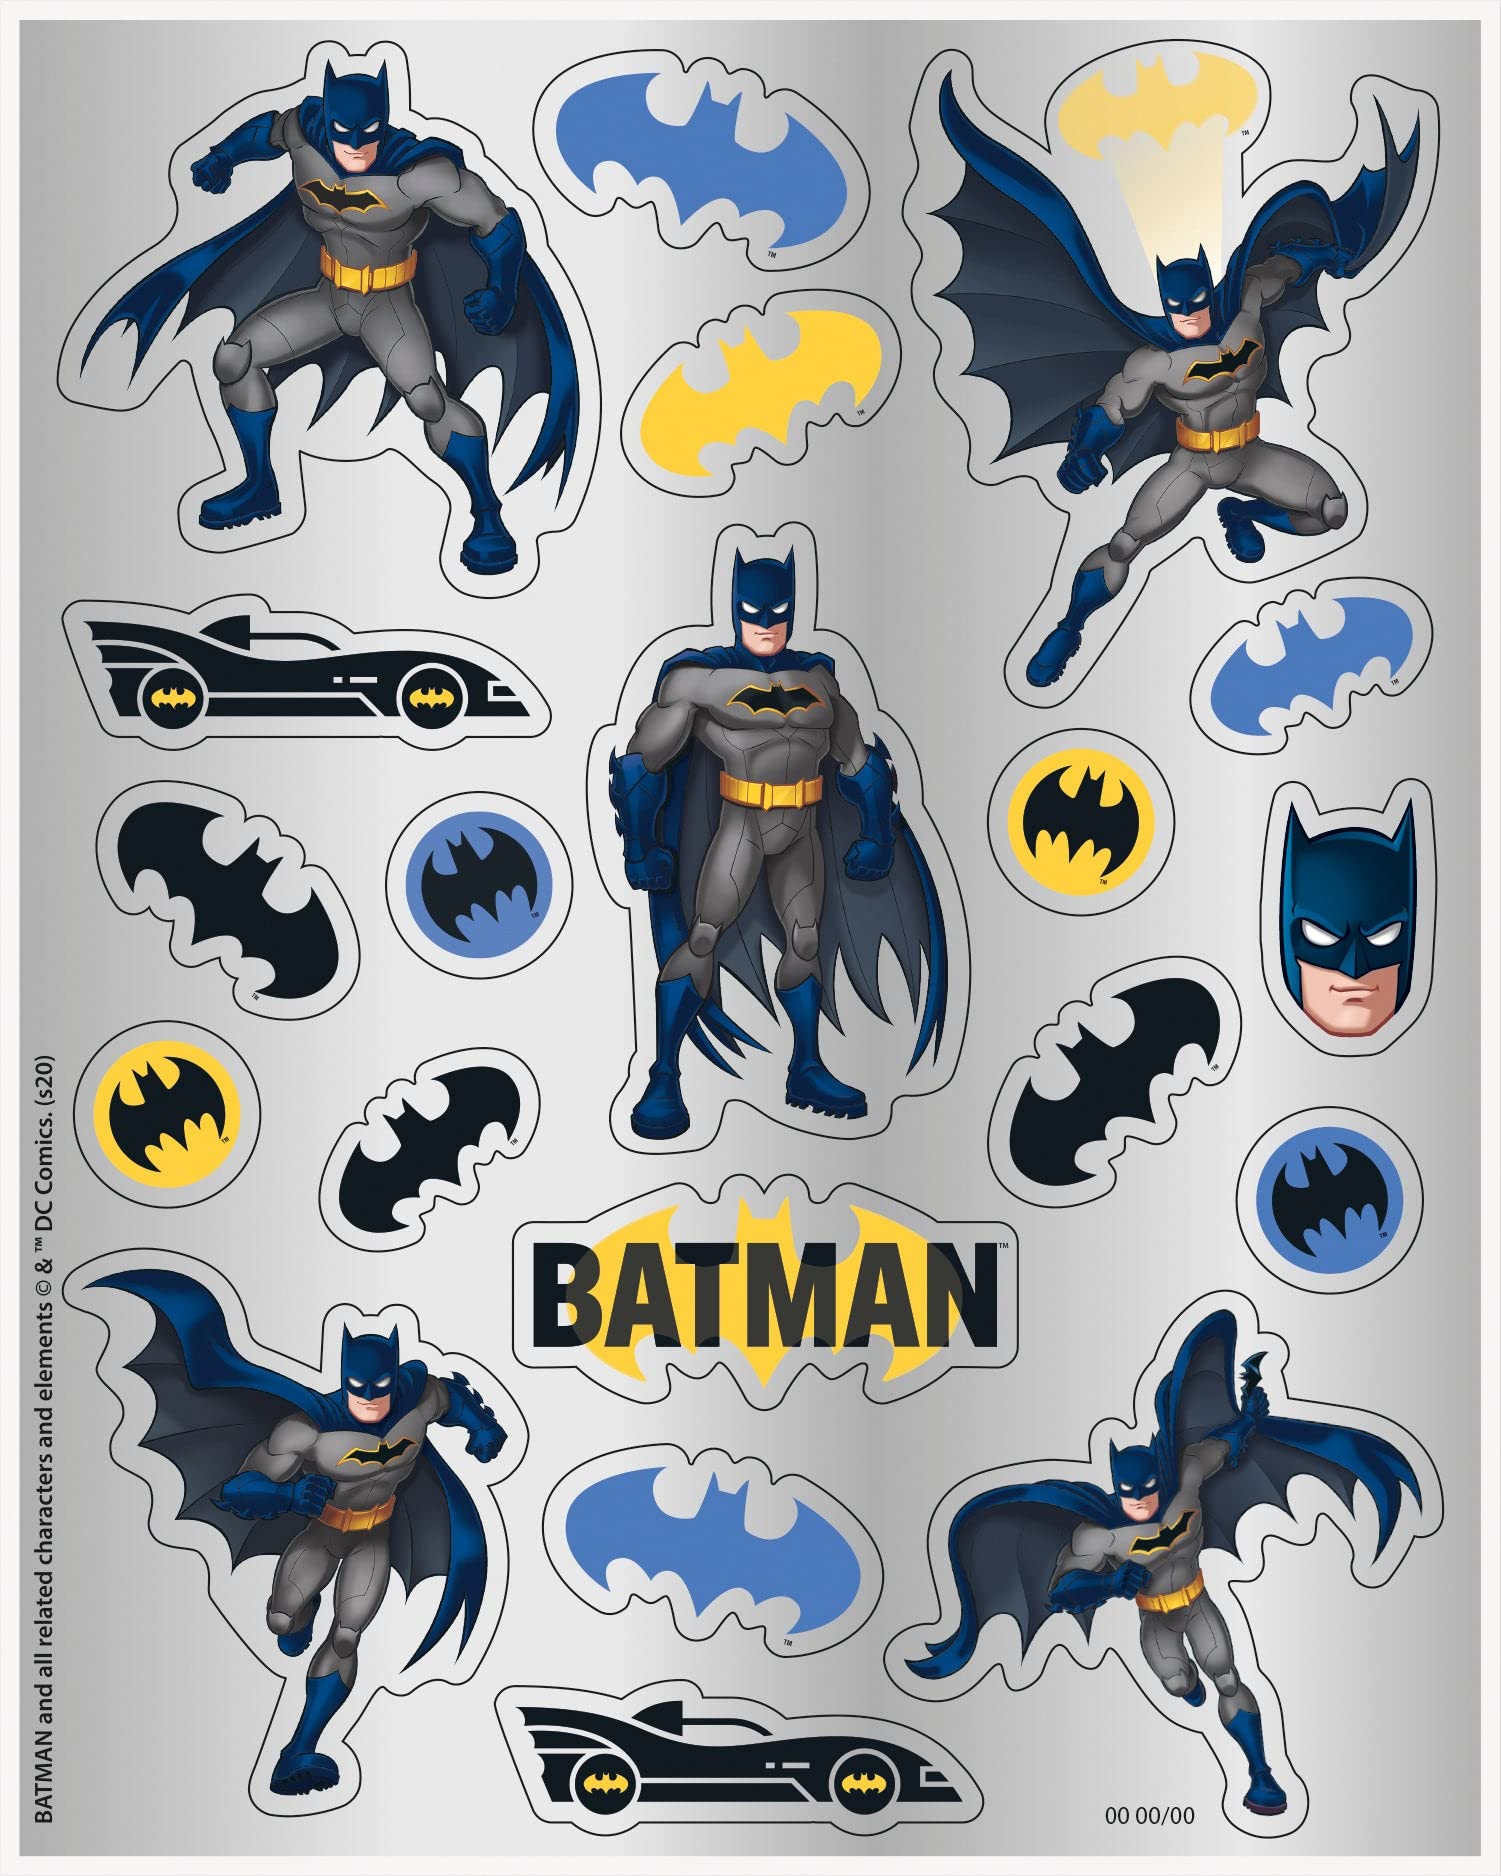 Batman Assorted Sticker Sheets - 4 Pcs - Multicolor Paper Stickers for Kid's Birthdays & Parties